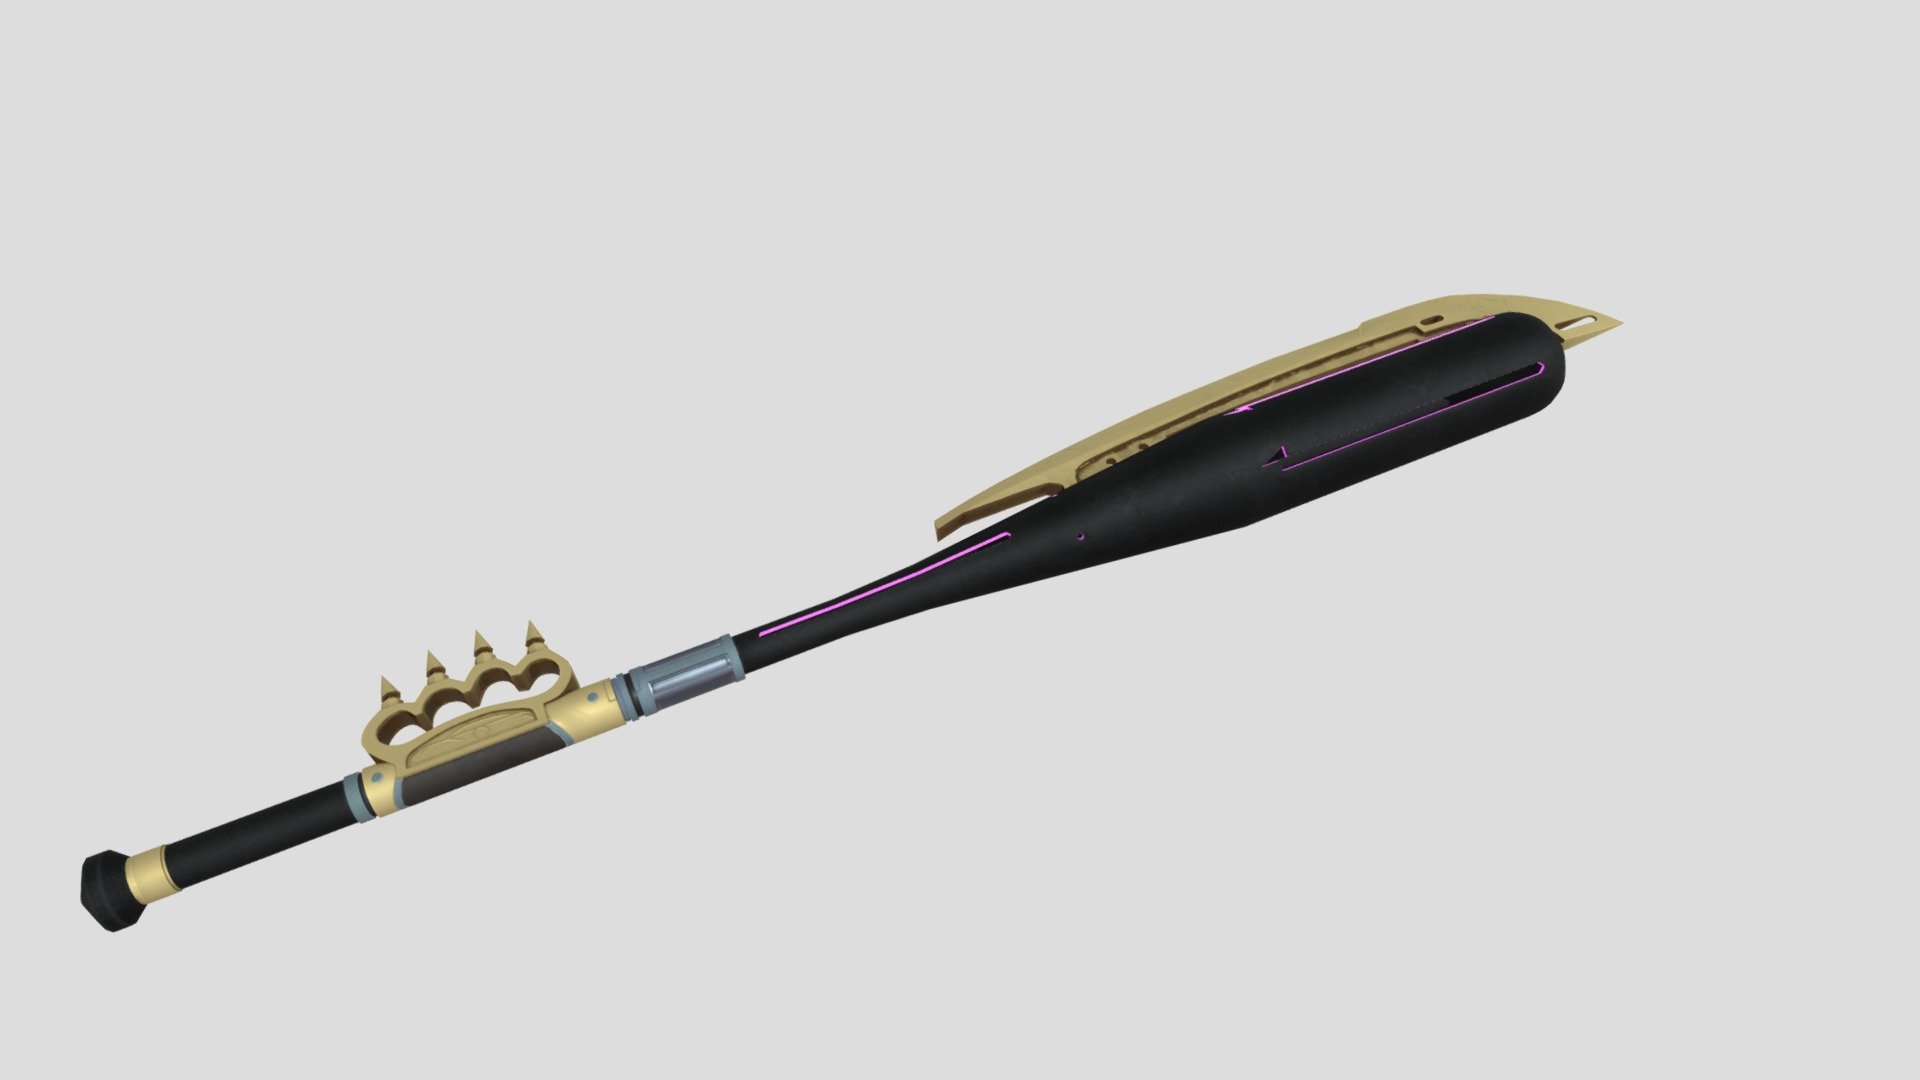 He spend most of his time alone polishing his bat, or so I heard - Tríckster's bat - 3D model by DoubleLu (@Diangelion) 3d model